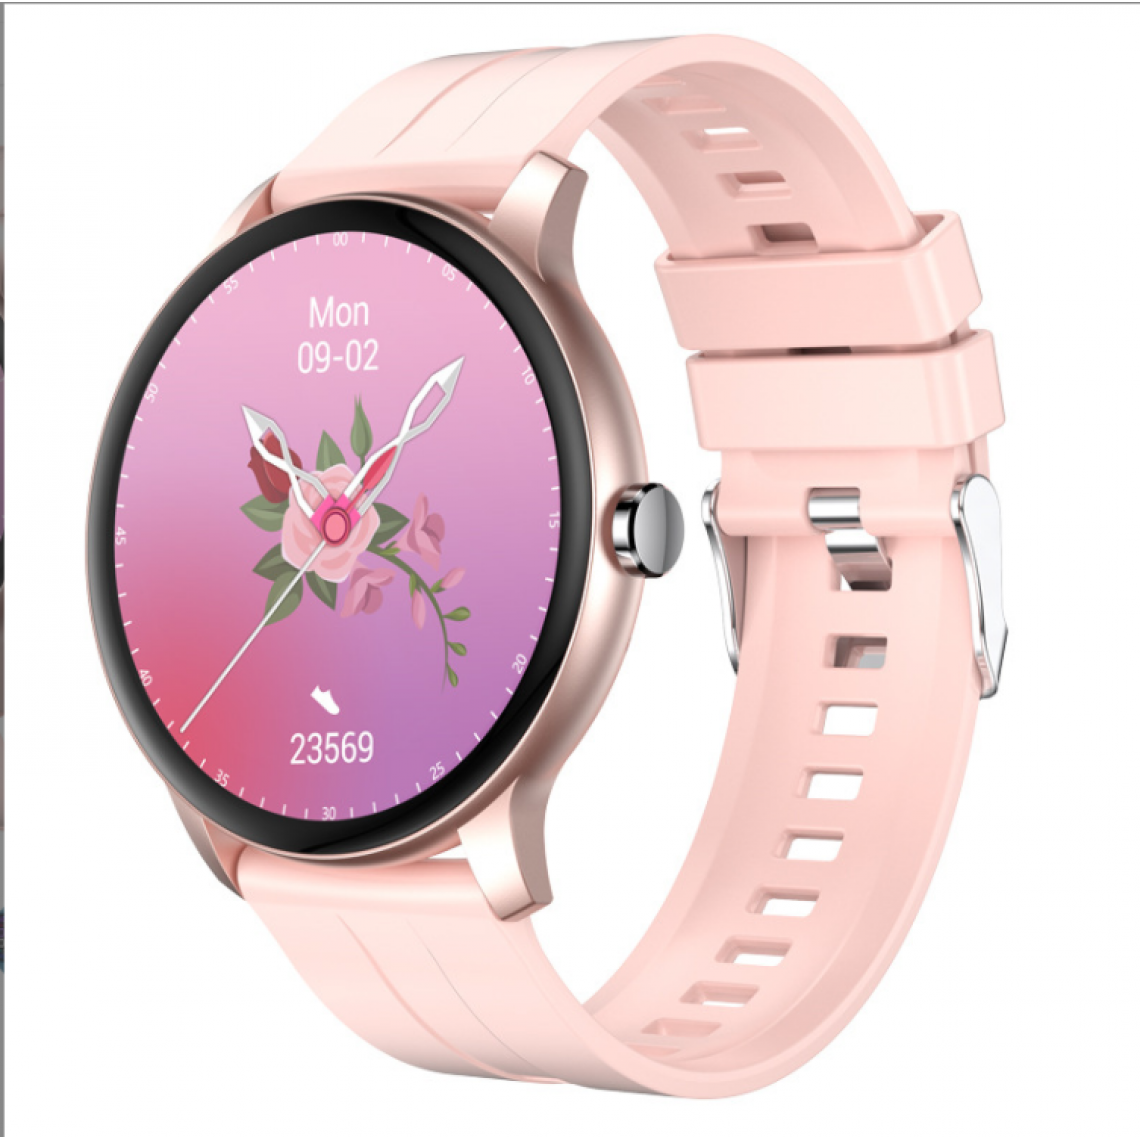 Chronotech Montres - Chronus Smart Watch, Bluetooth Calling, Sleep Monitoring, Sports Mode, for Android IOS (Pink) - Montre connectée